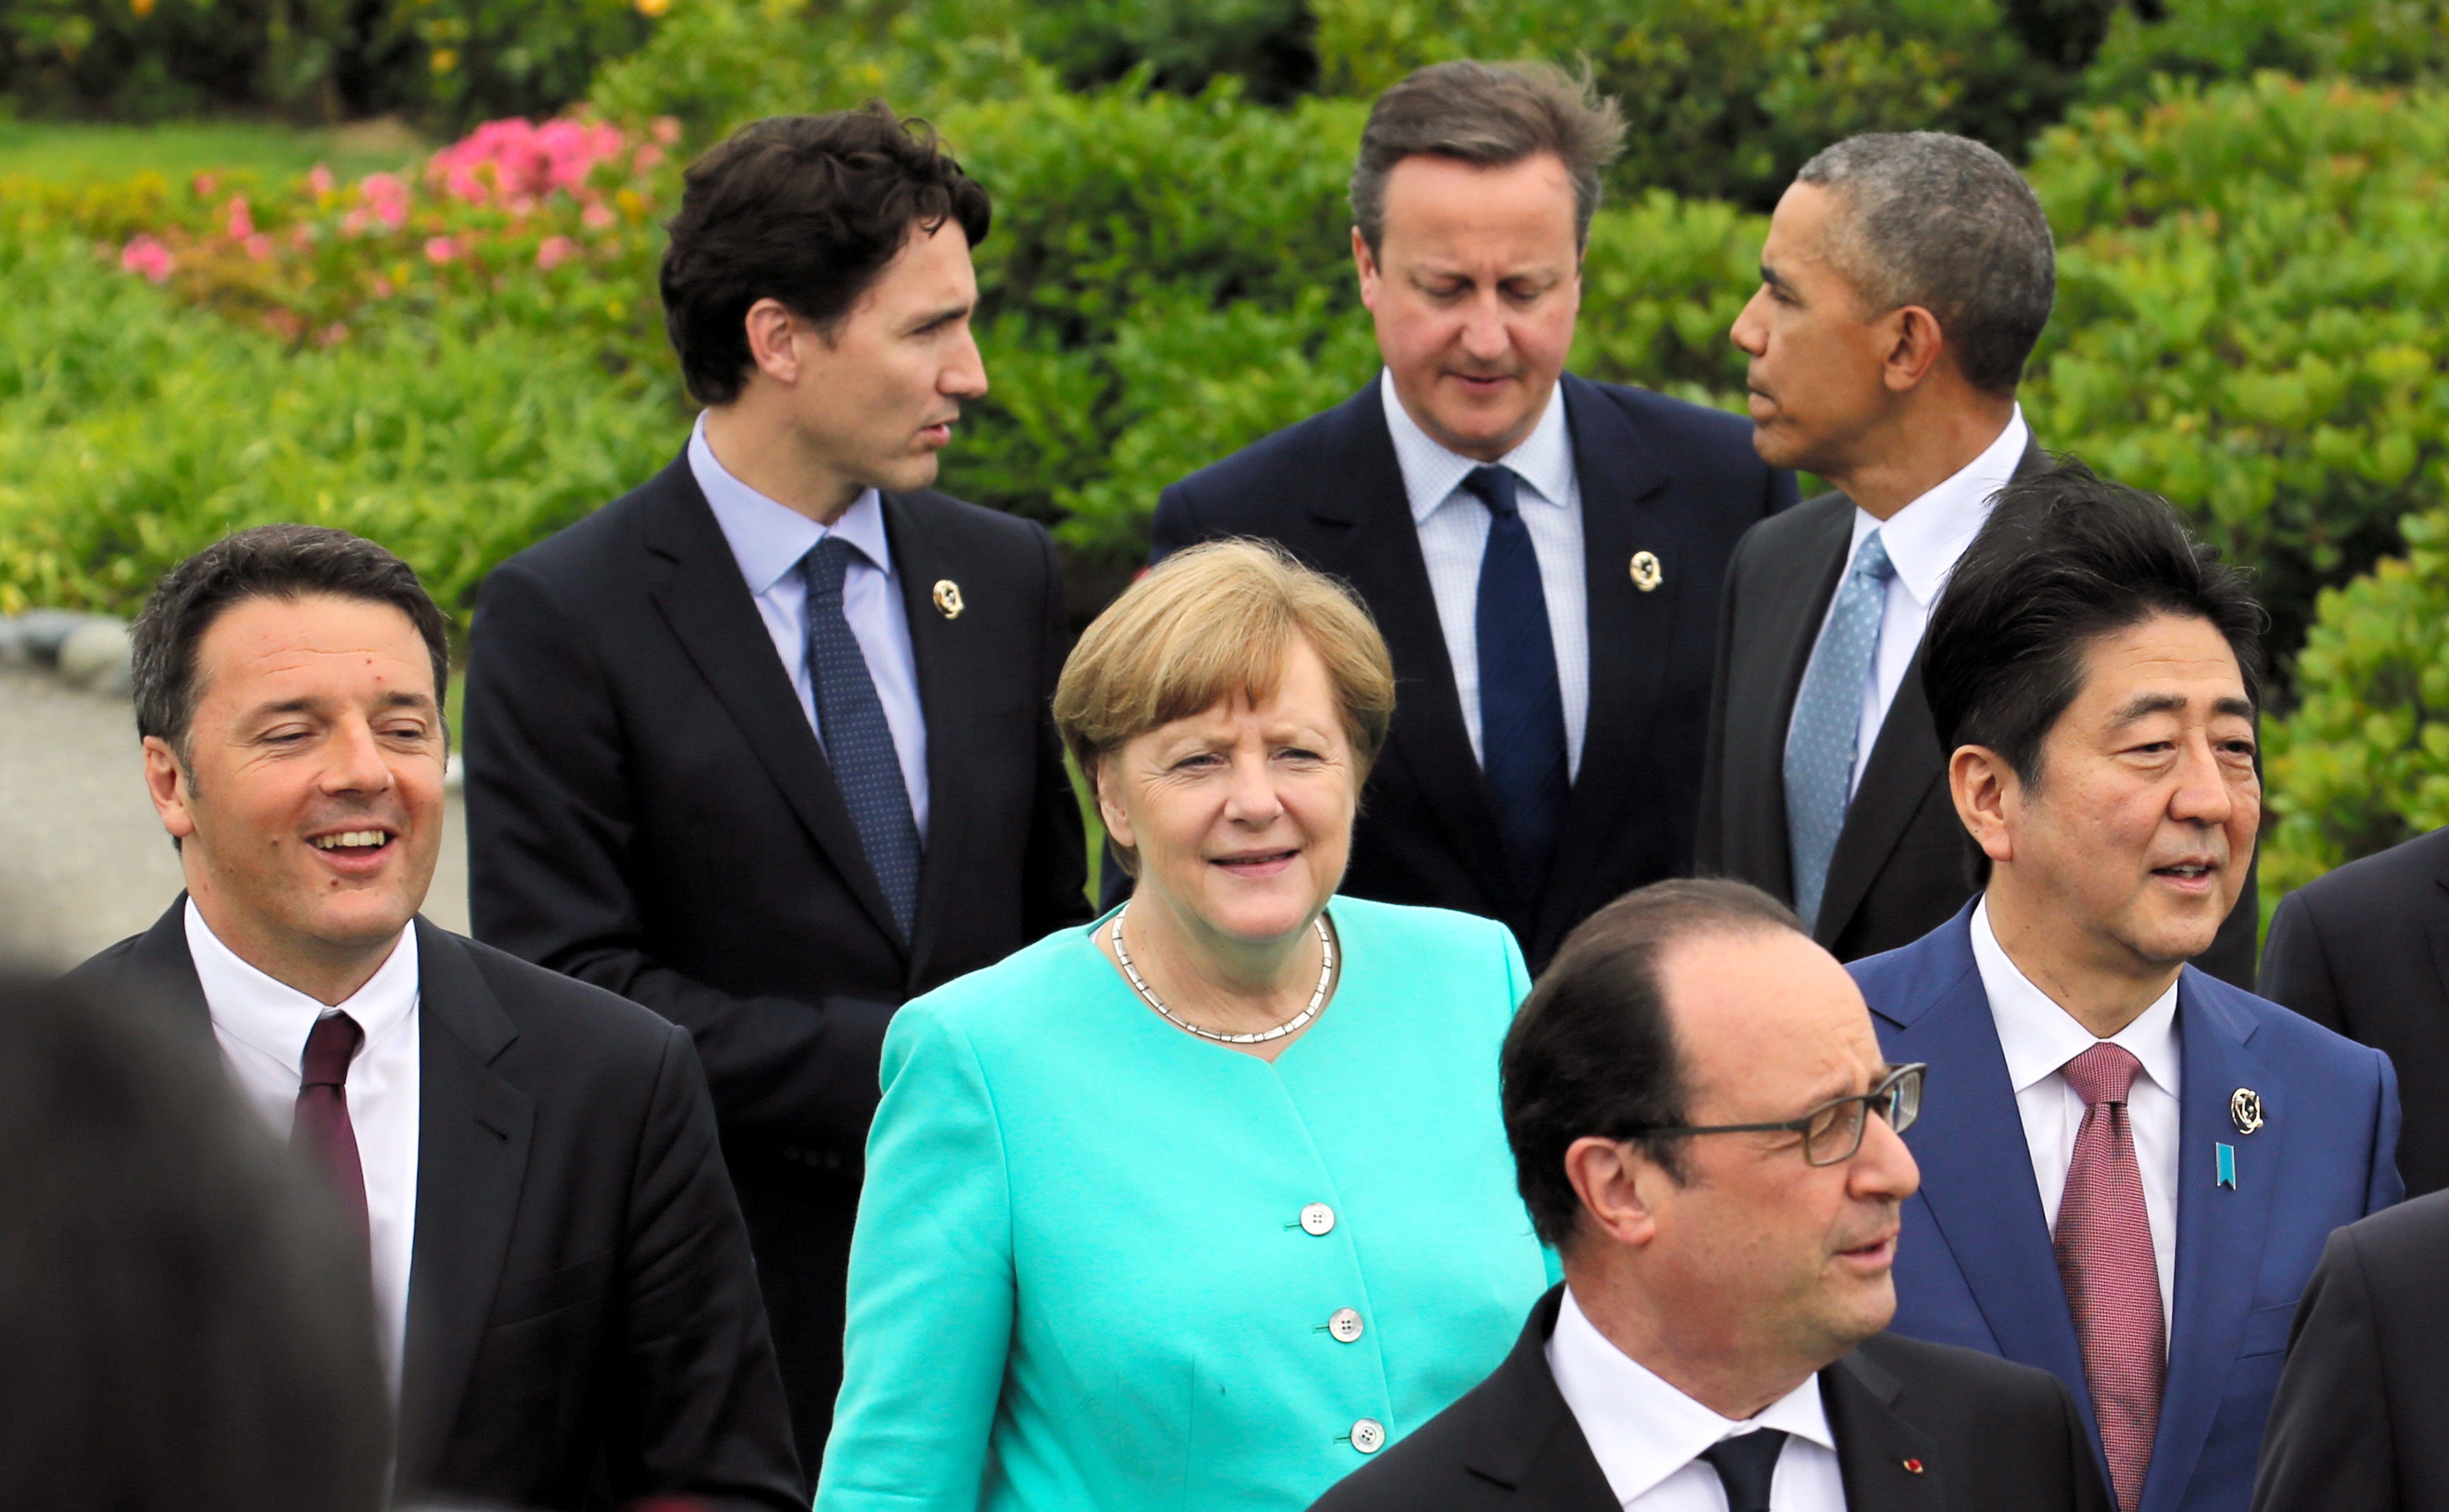 The G7 leaders from Italy, Canada, Germany, Britain, France, the United States, and Japan (Getty Images)